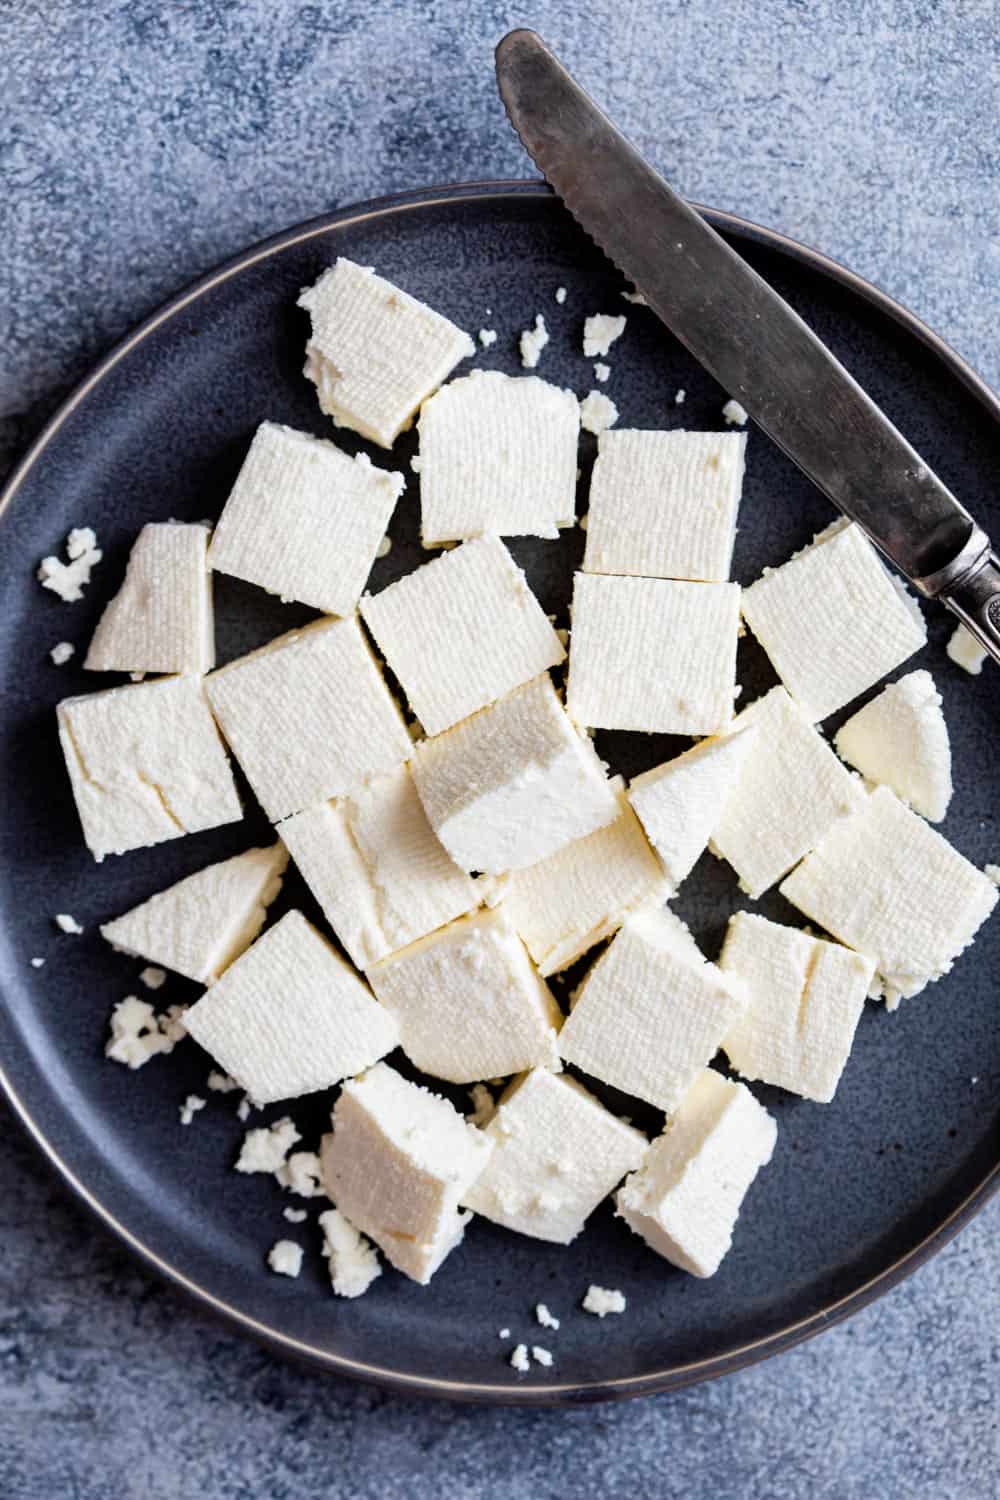 Learn how to make paneer at home. Cubes of paneer on a dark plate